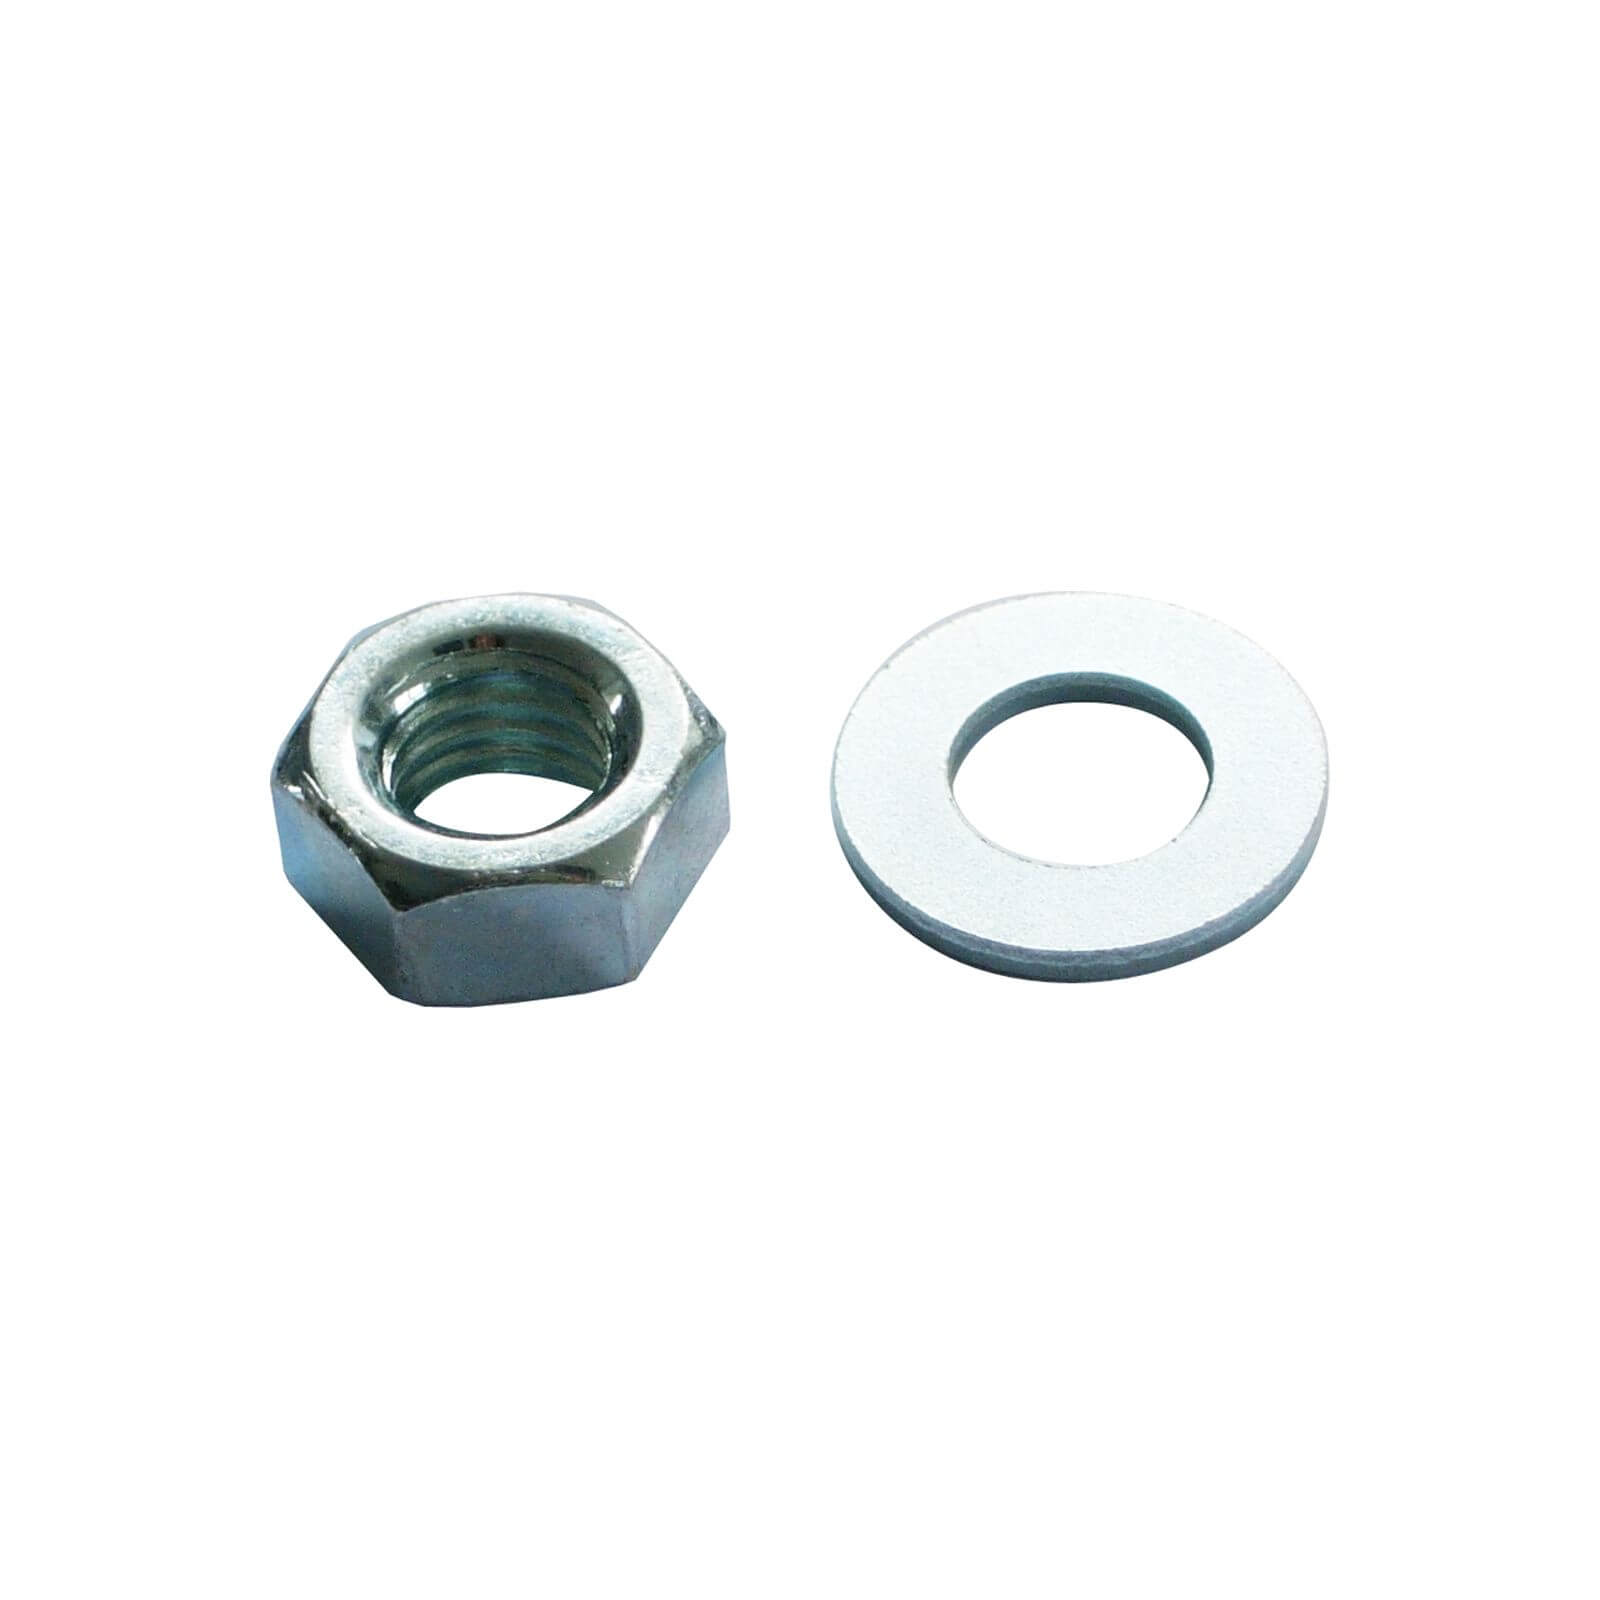 Hex Nut & Washer - Bright Zinc Plated - M6 - 10 Pack